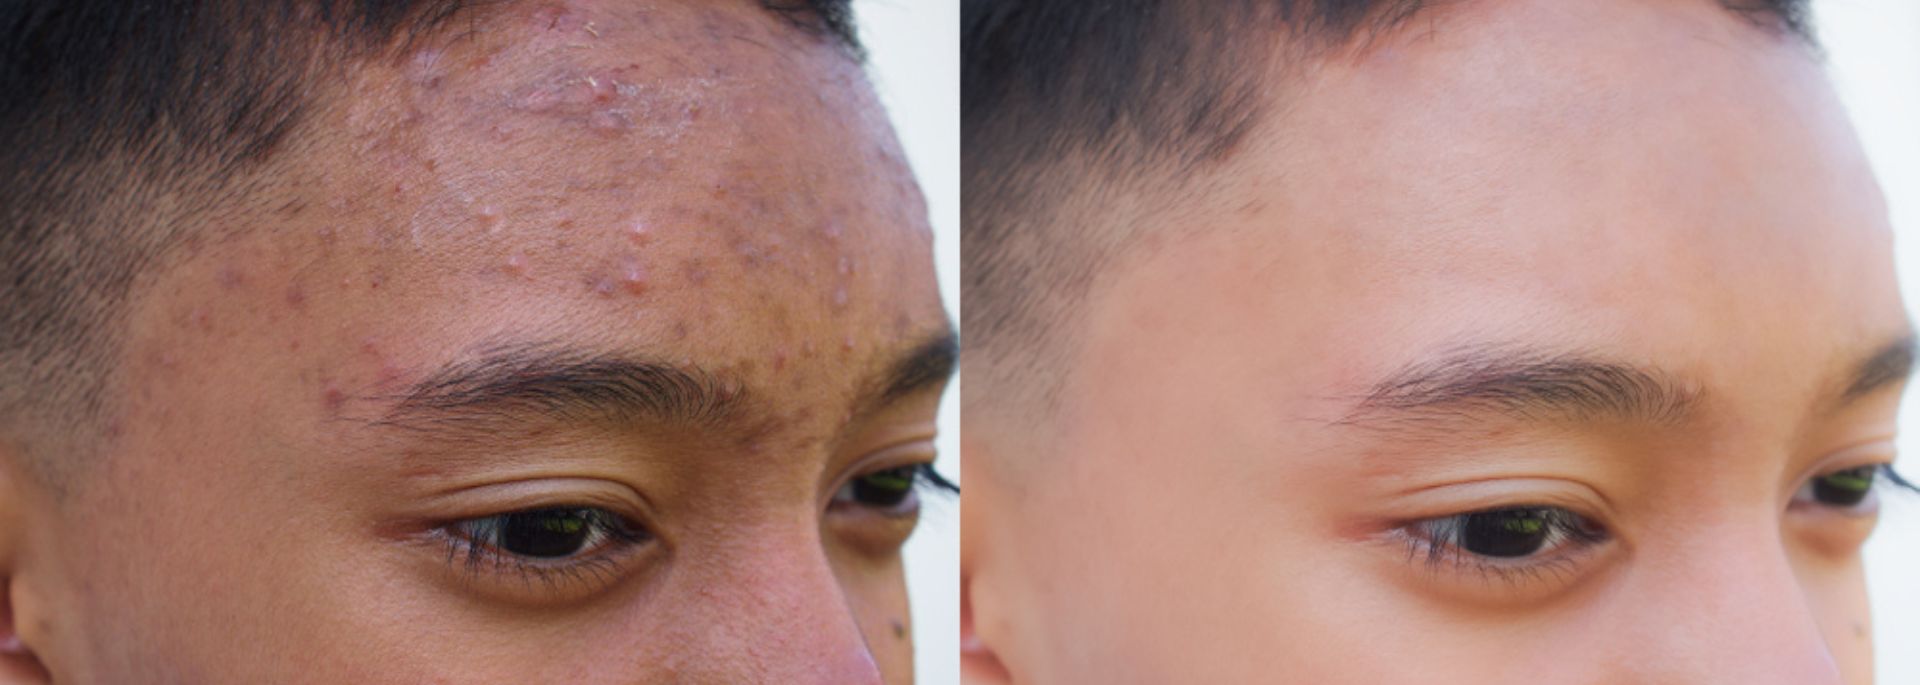 2 pictures of the same man, one picture has acne and the other has clear skin